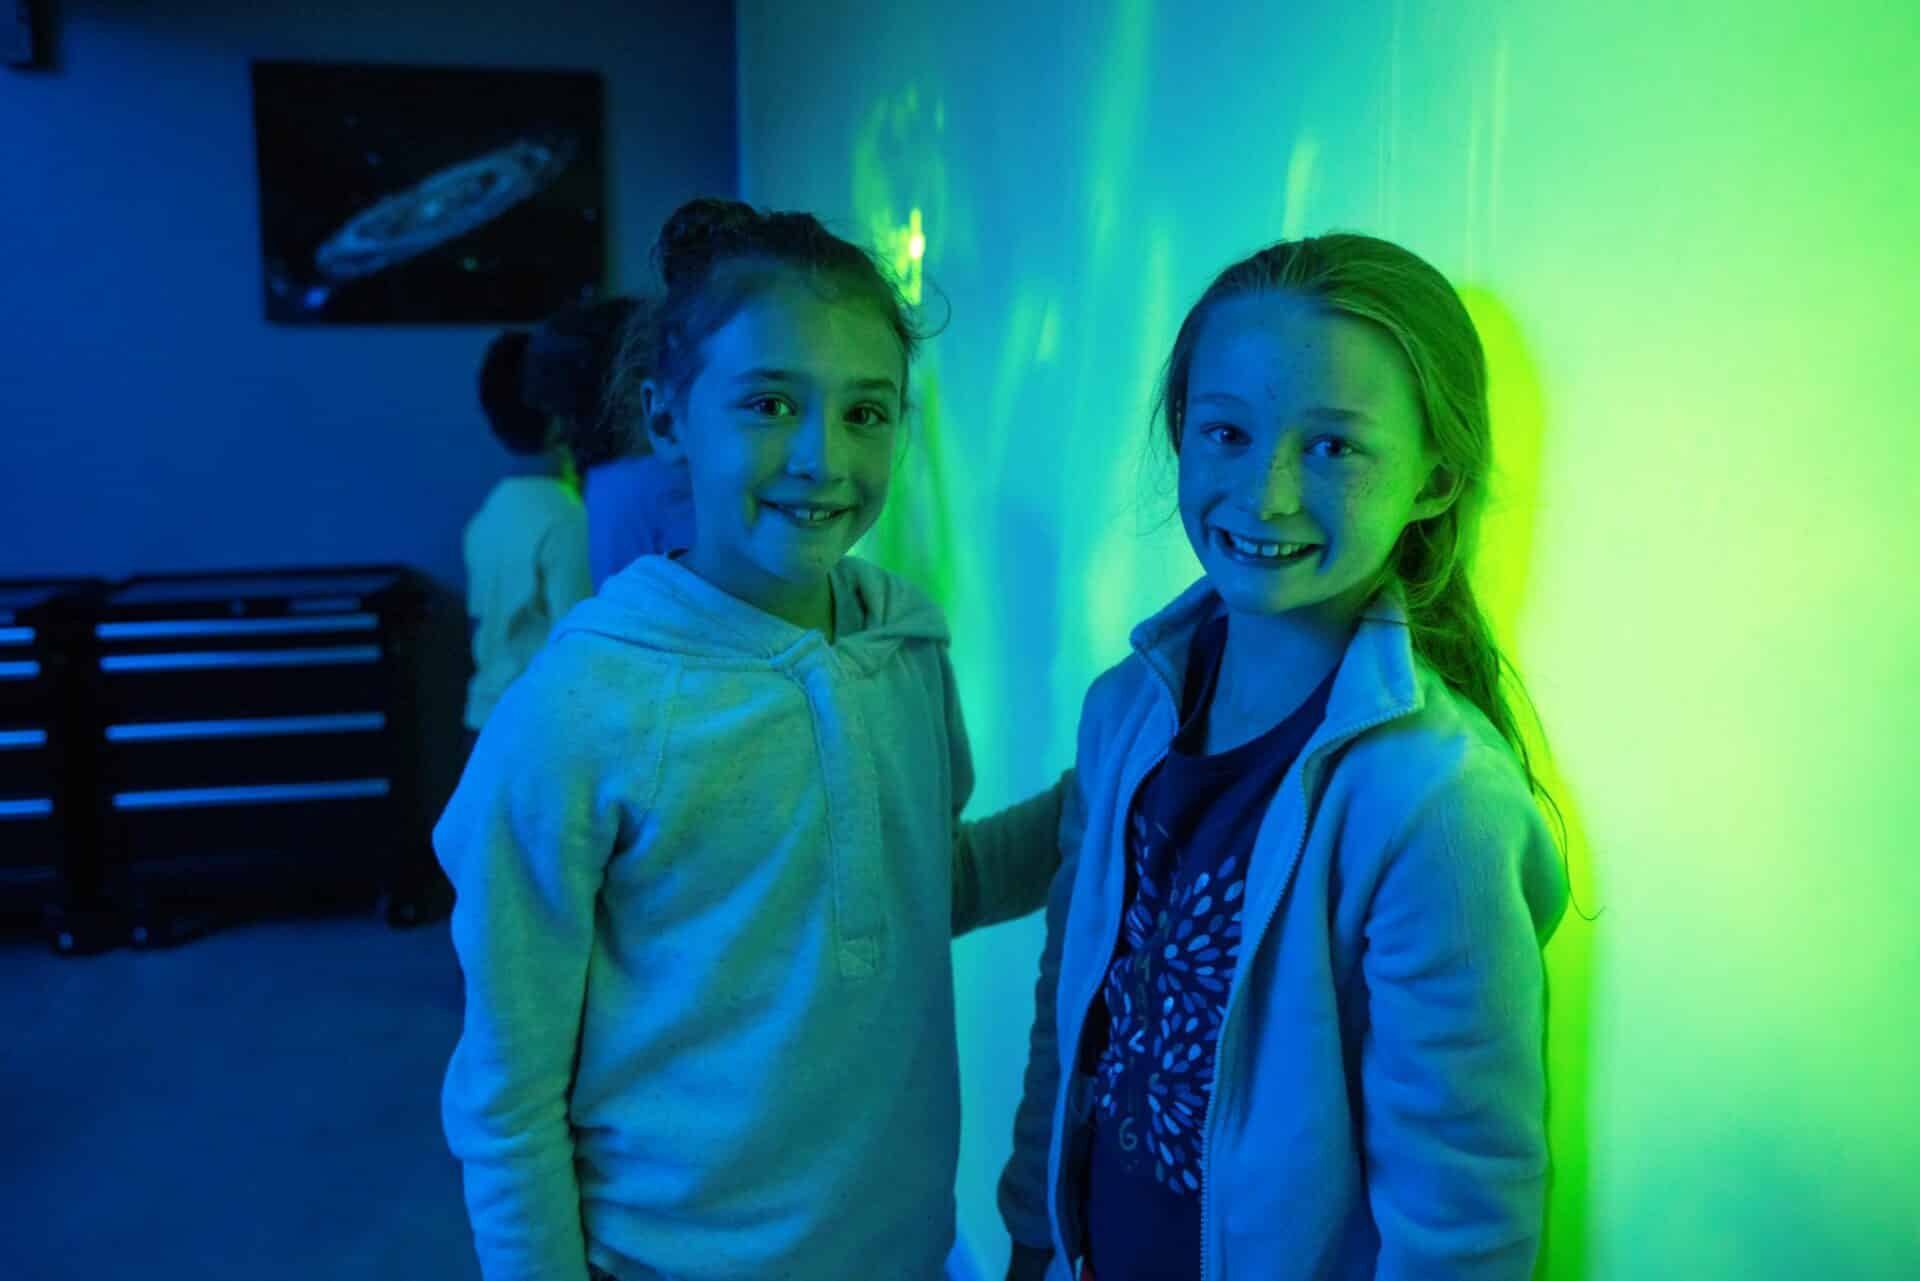 Two girls smiling in blue and green.